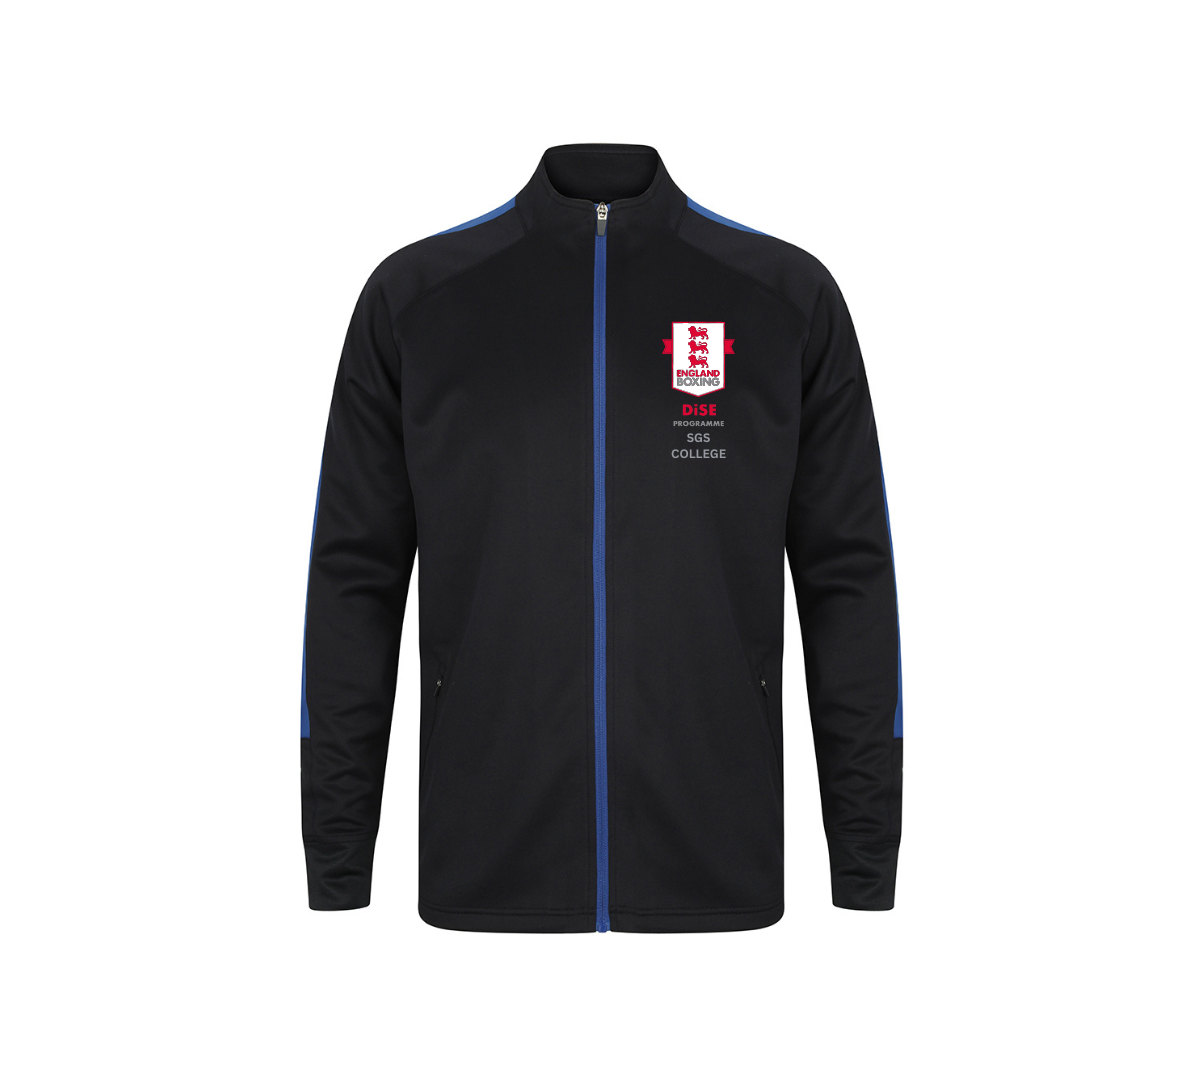 DiSE Programme (SGS College) Tracksuit Top